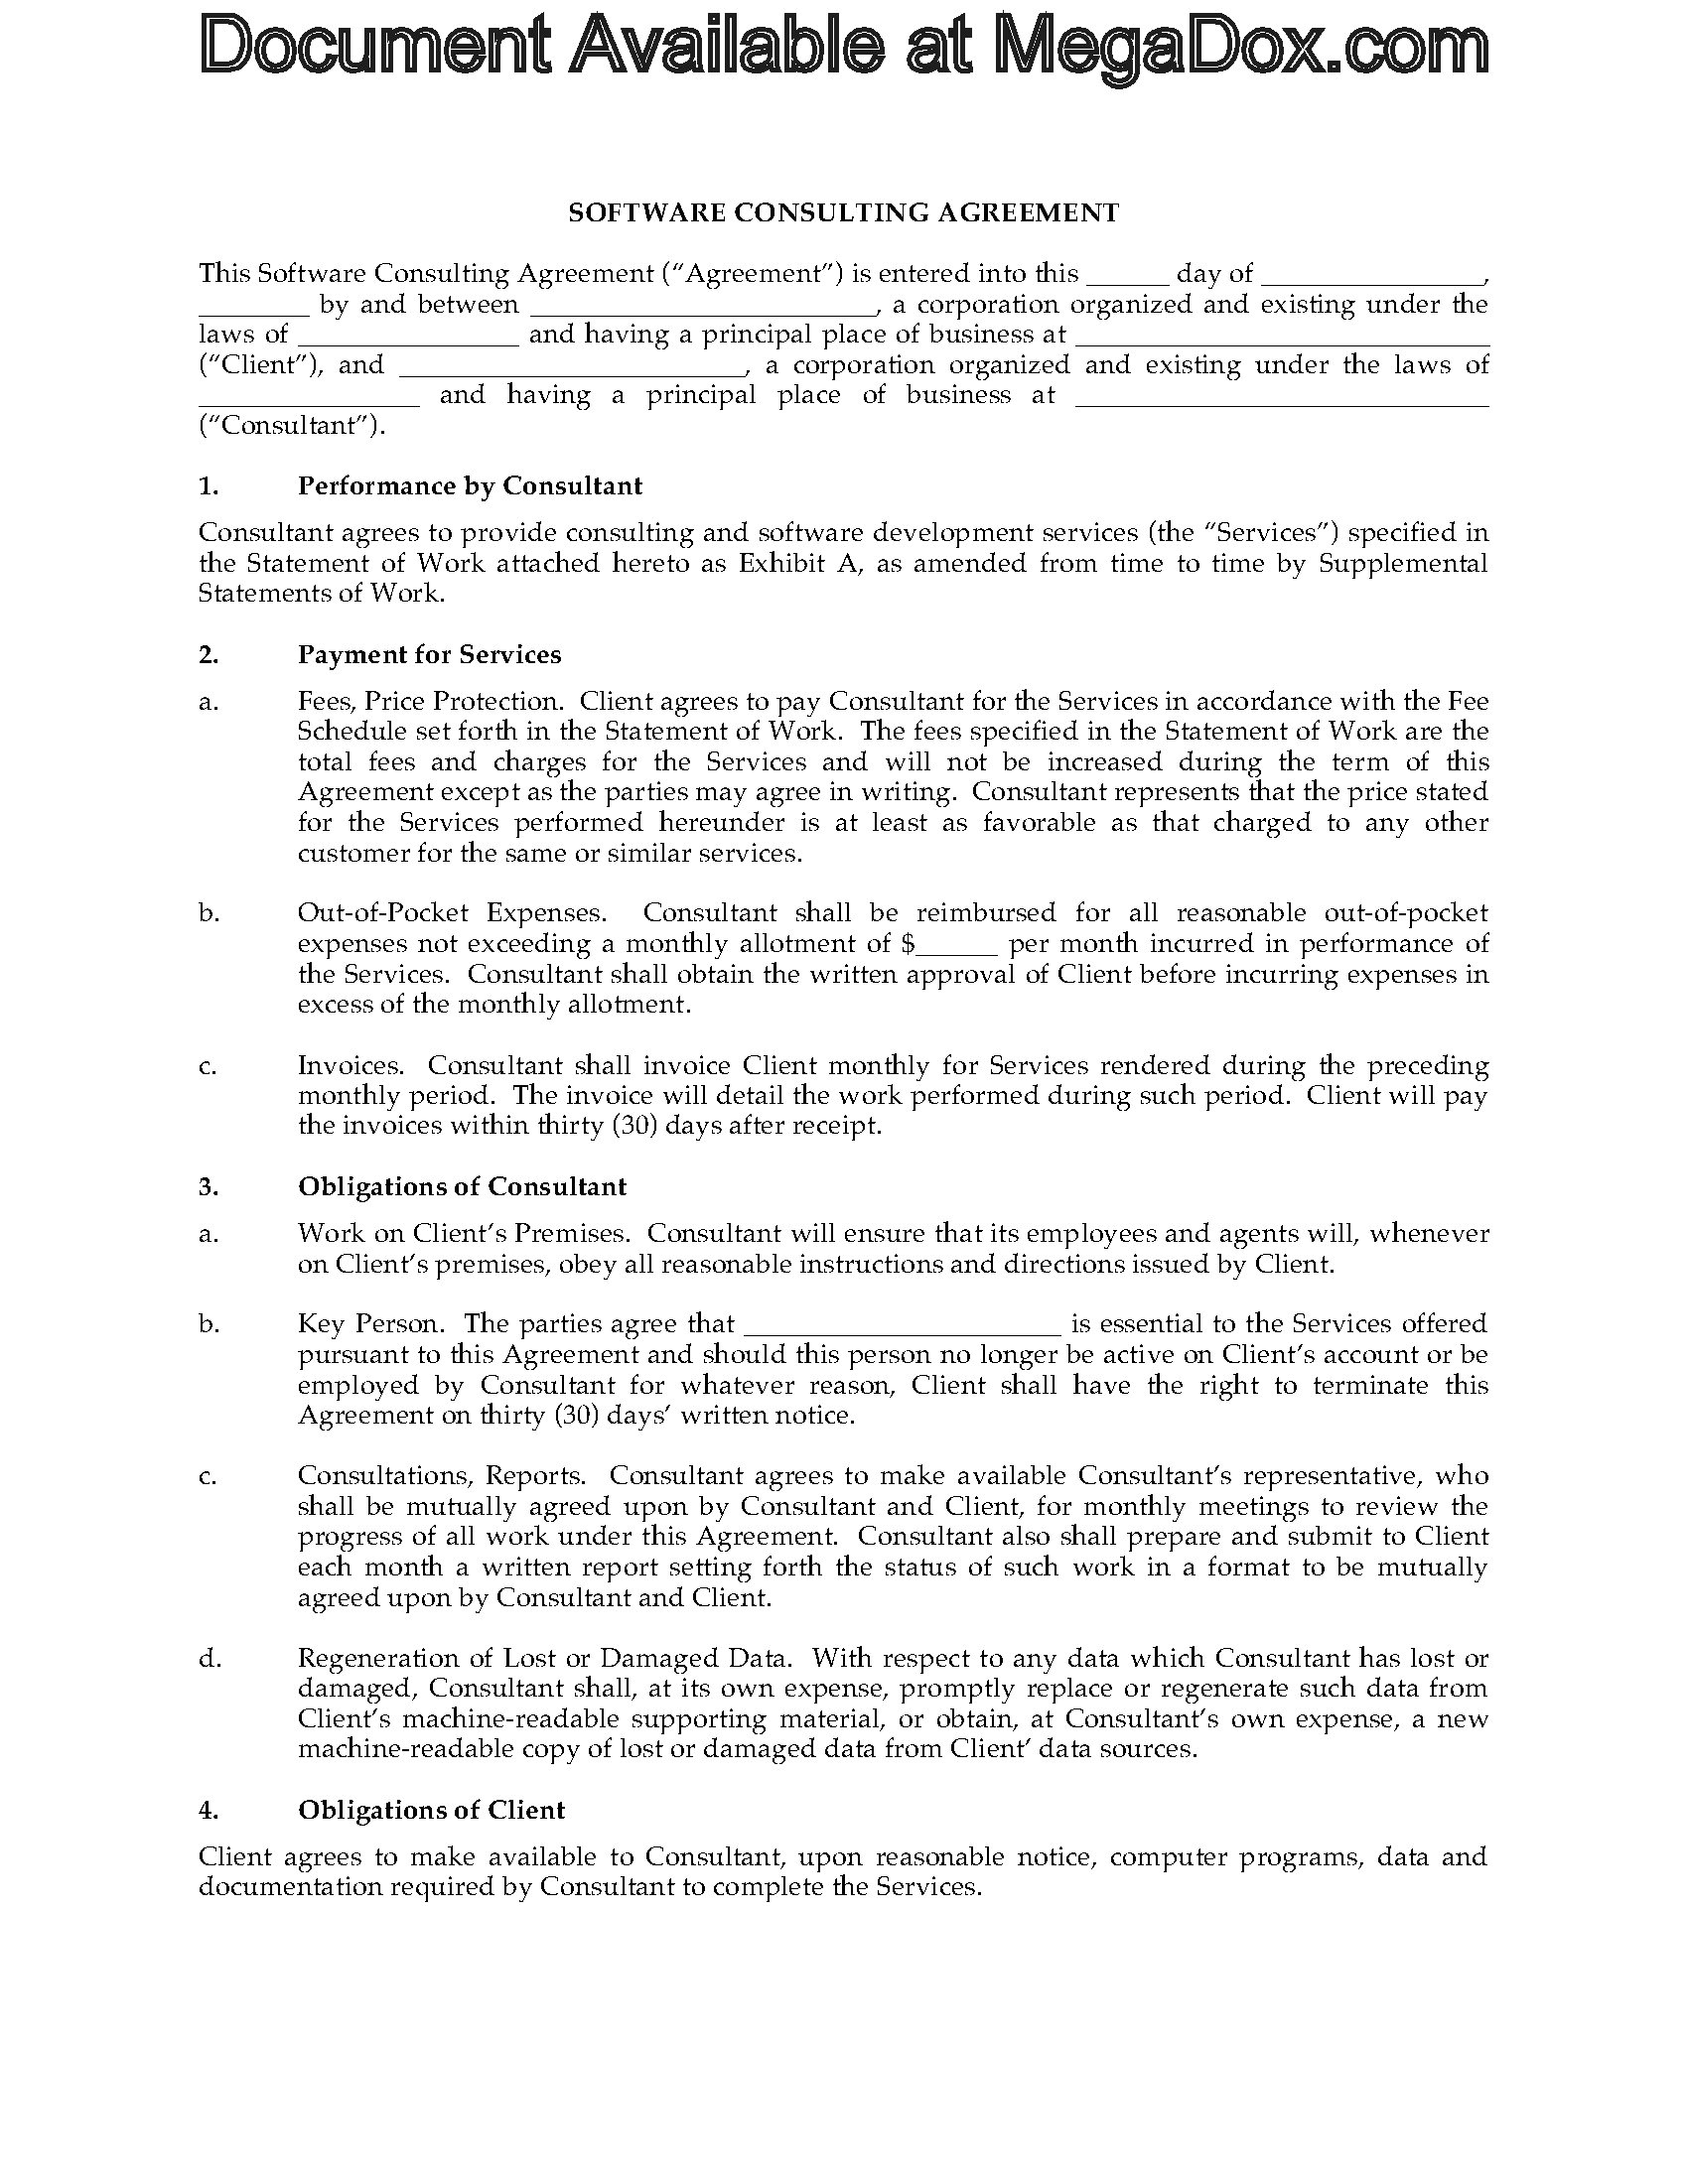 software consulting agreement